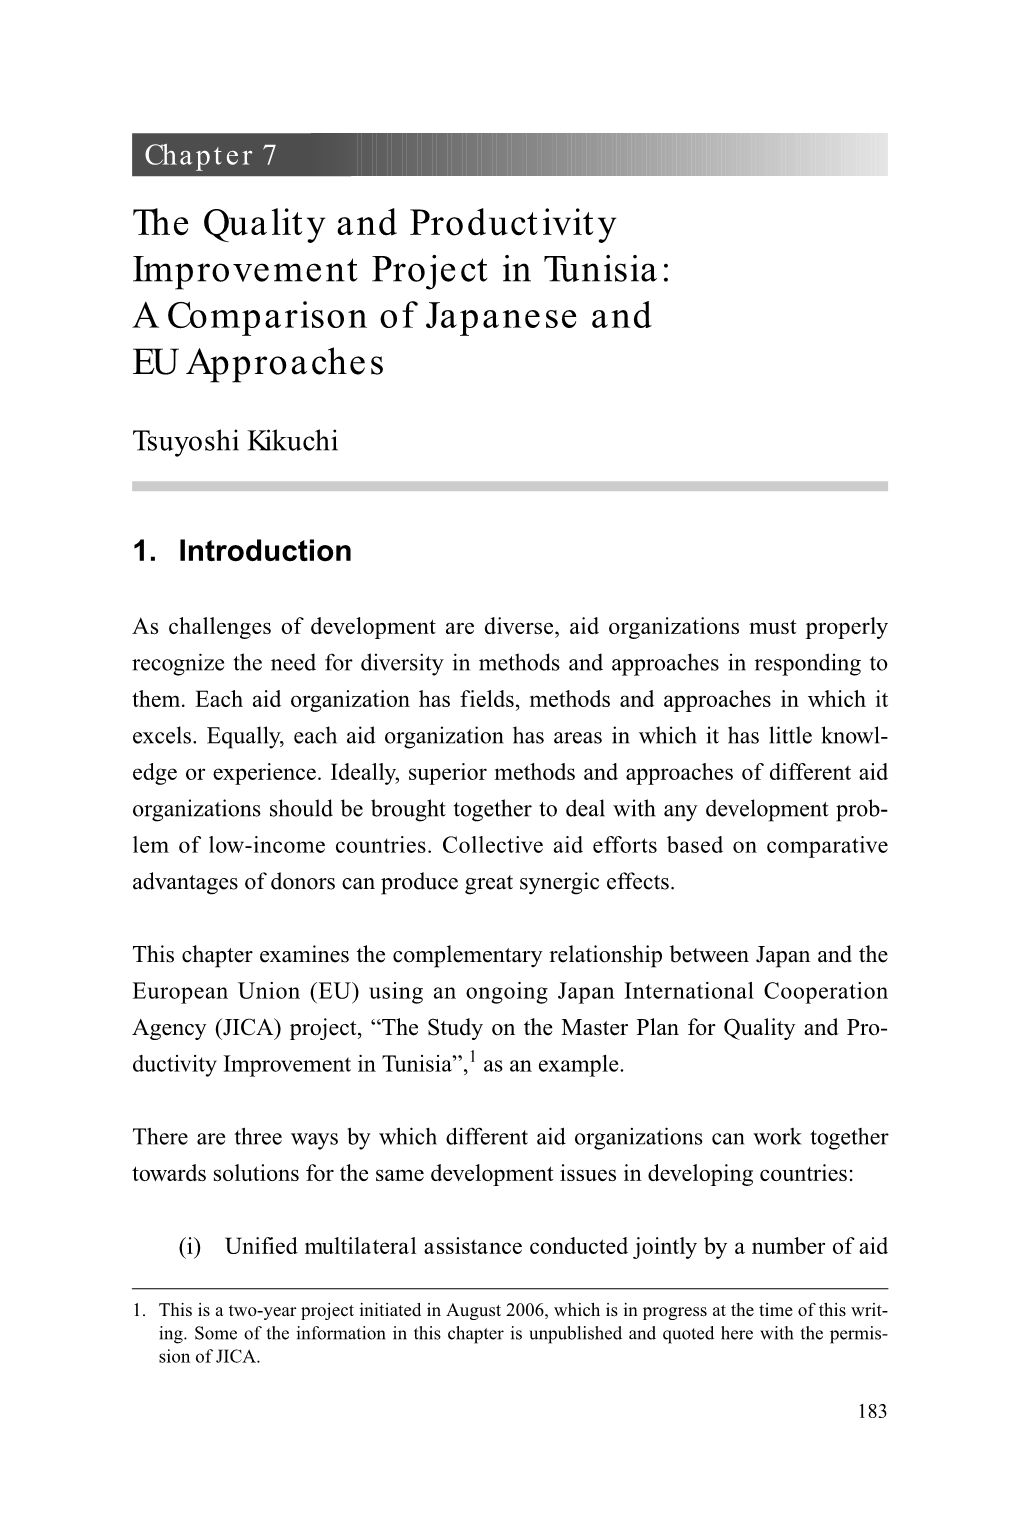 Chapter 7 the Quality and Productivity Improvement Project in Tunisia: a Comparison of Japanese and EU Approaches